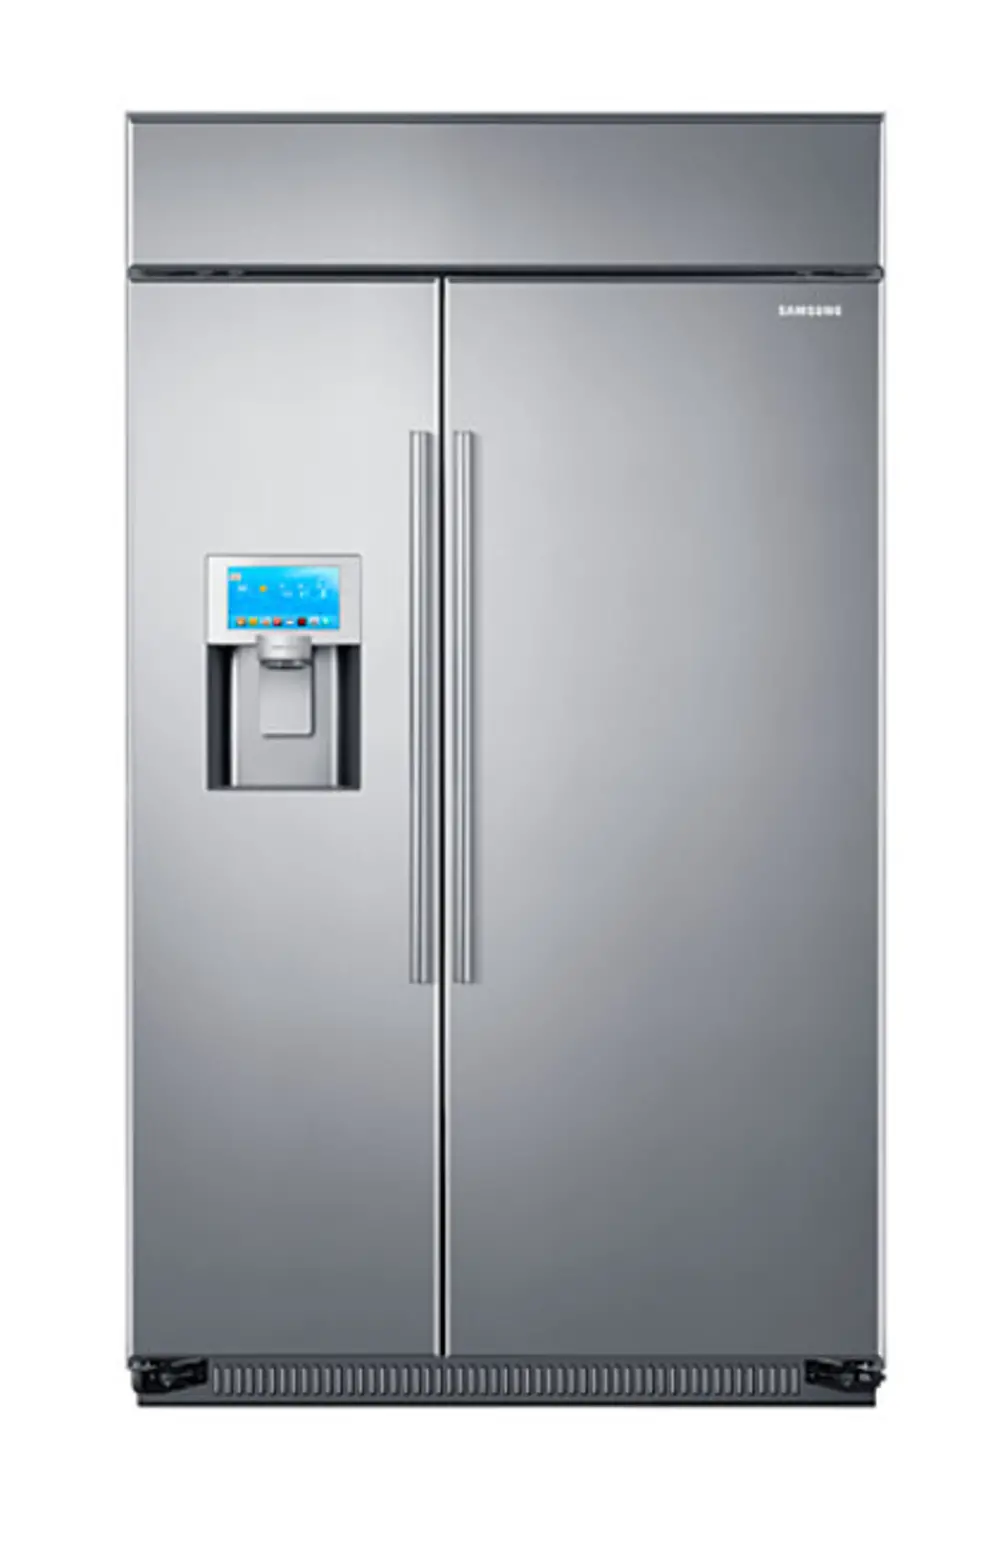 RS27FDBTNSR Samsung Stainless Steel Side-by-Side Refrigerator - 48 Inch-1